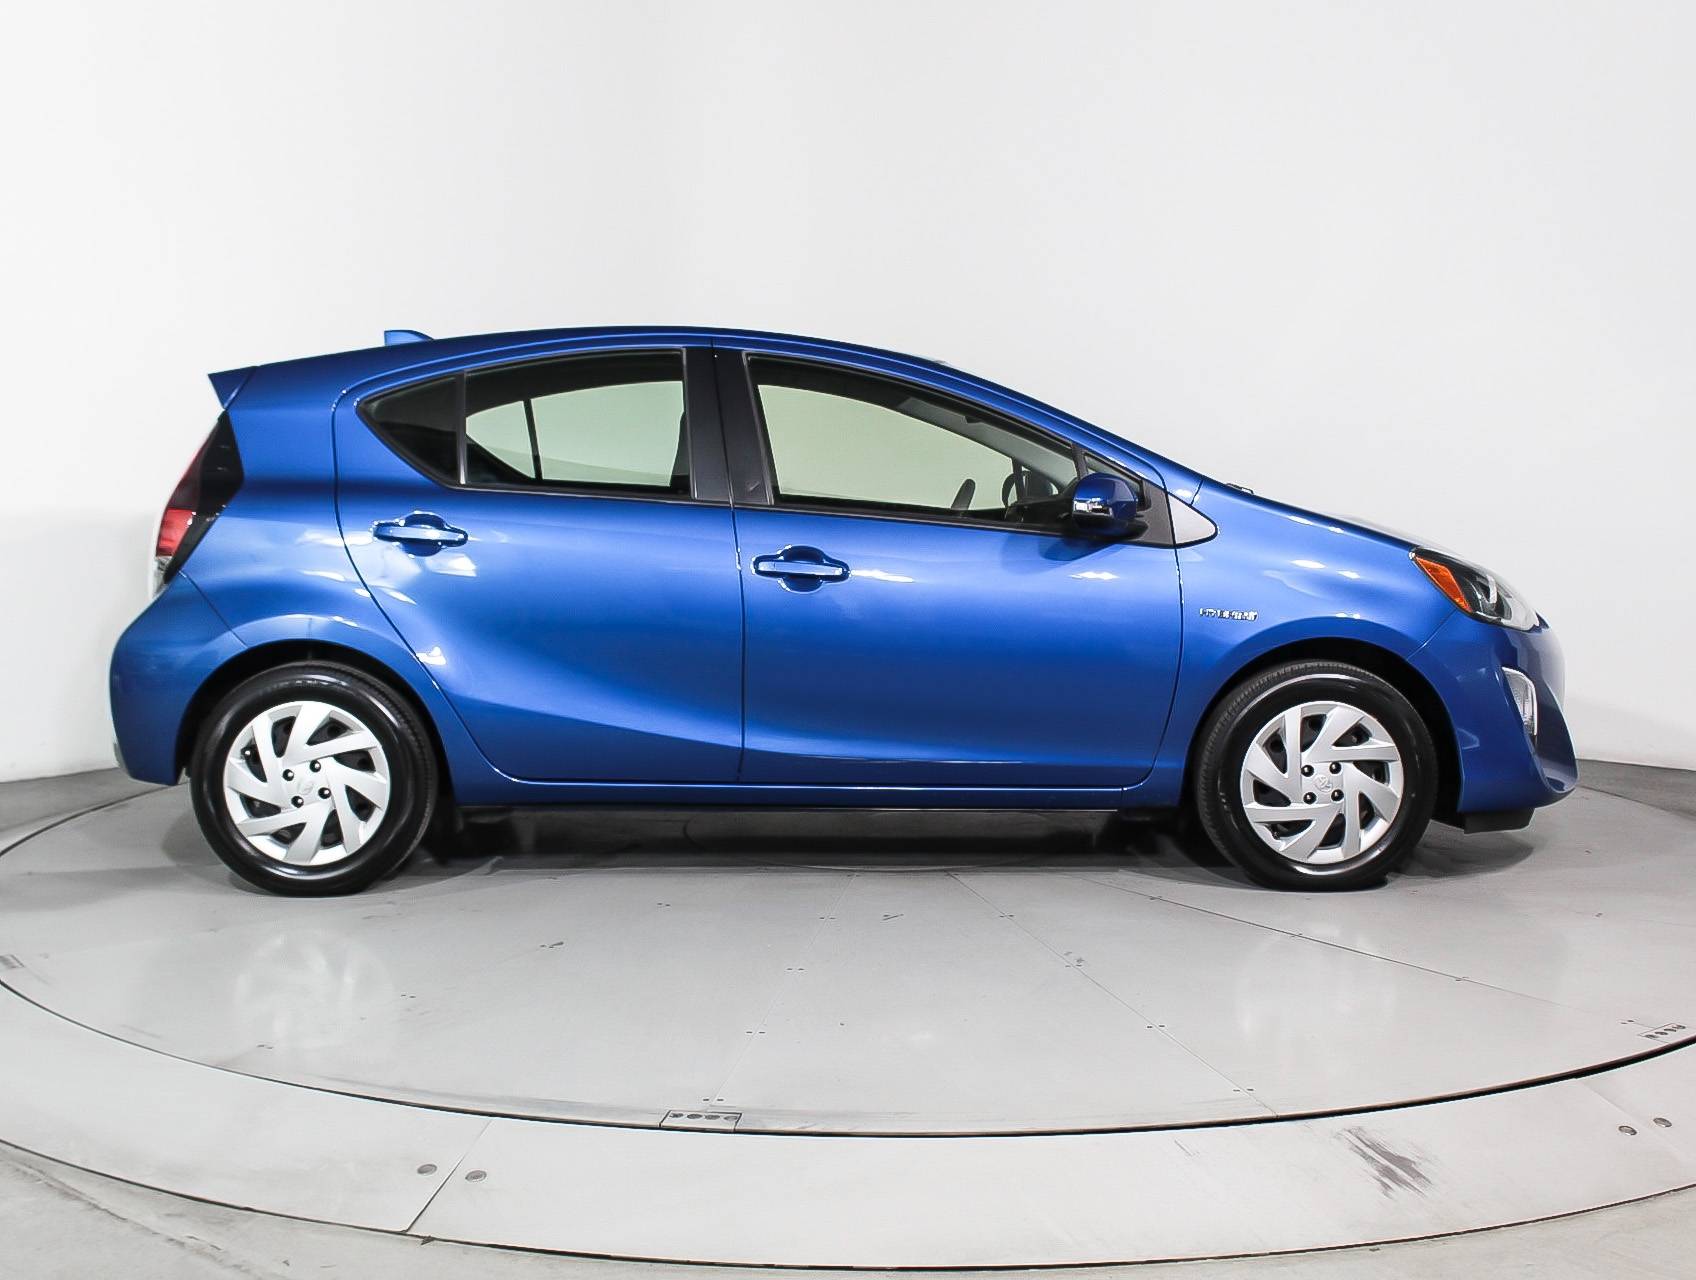 Florida Fine Cars - Used TOYOTA PRIUS C 2015 HOLLYWOOD Two